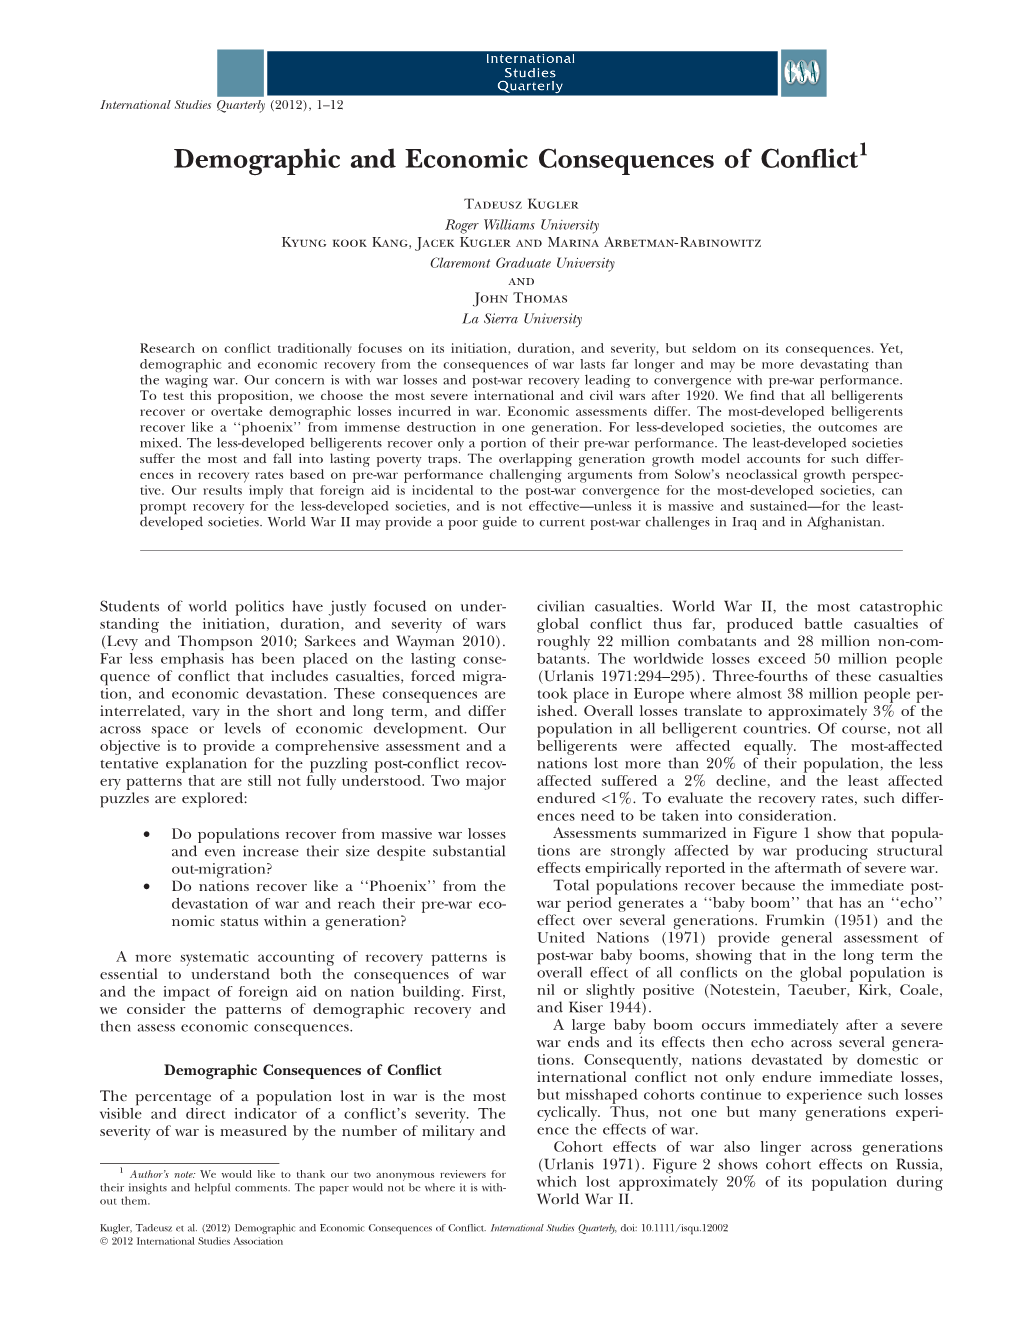 Demographic and Economic Consequences of Conflict1